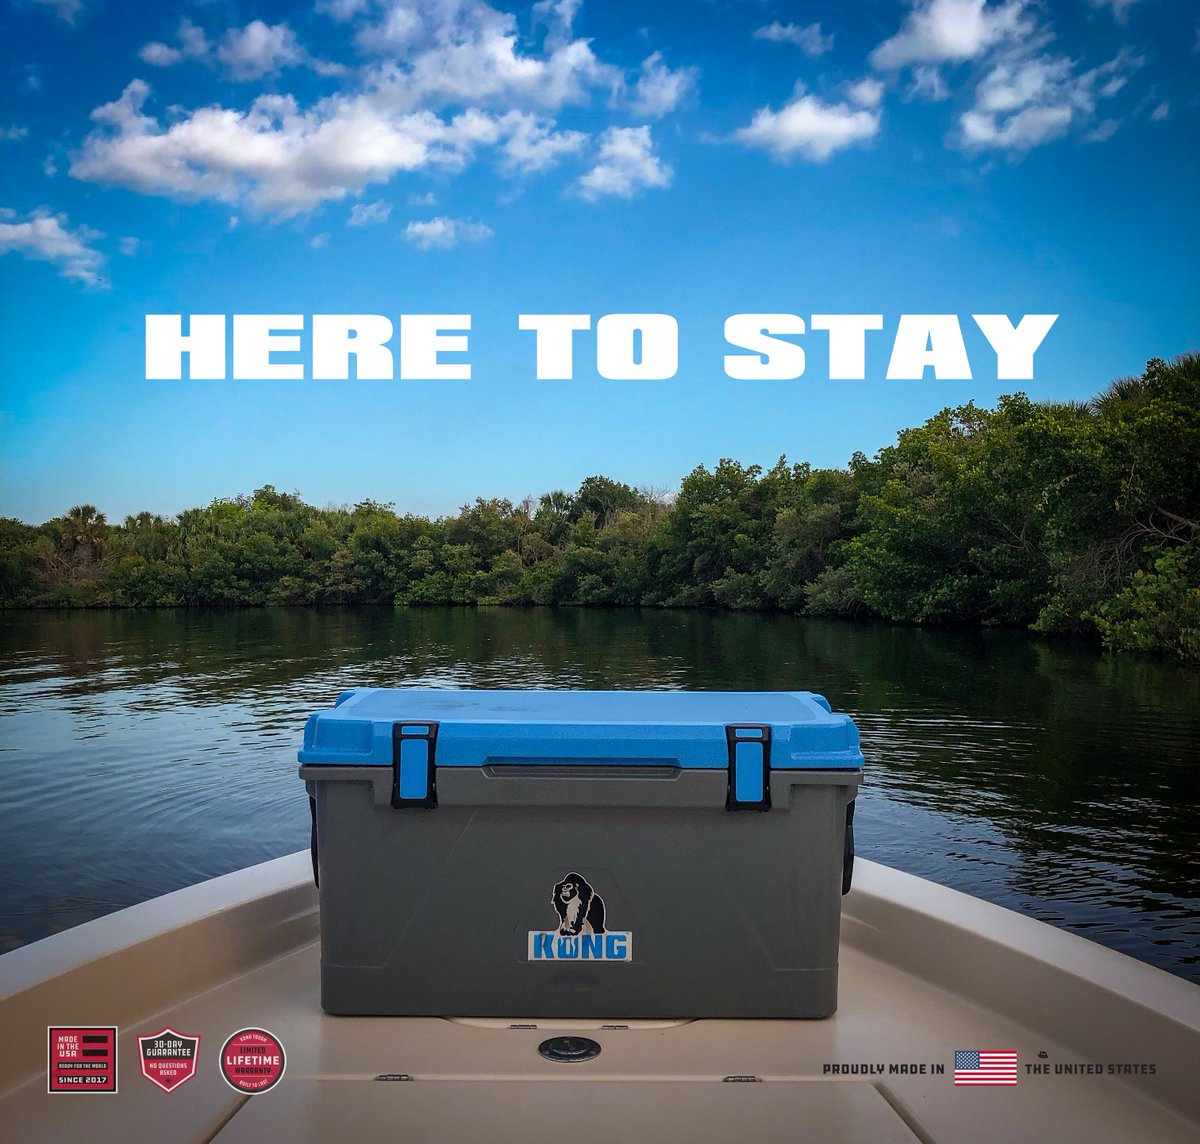 We've got good news and bad news! Bad news first. Our limited edition coolers USA Red and Outback Orange leave on Sept. 2. Order today to get one before Labor Day. The good news is that, due to popular demand, the Boulder Blue Cooler is joining KONG Coolers permanent lineup!